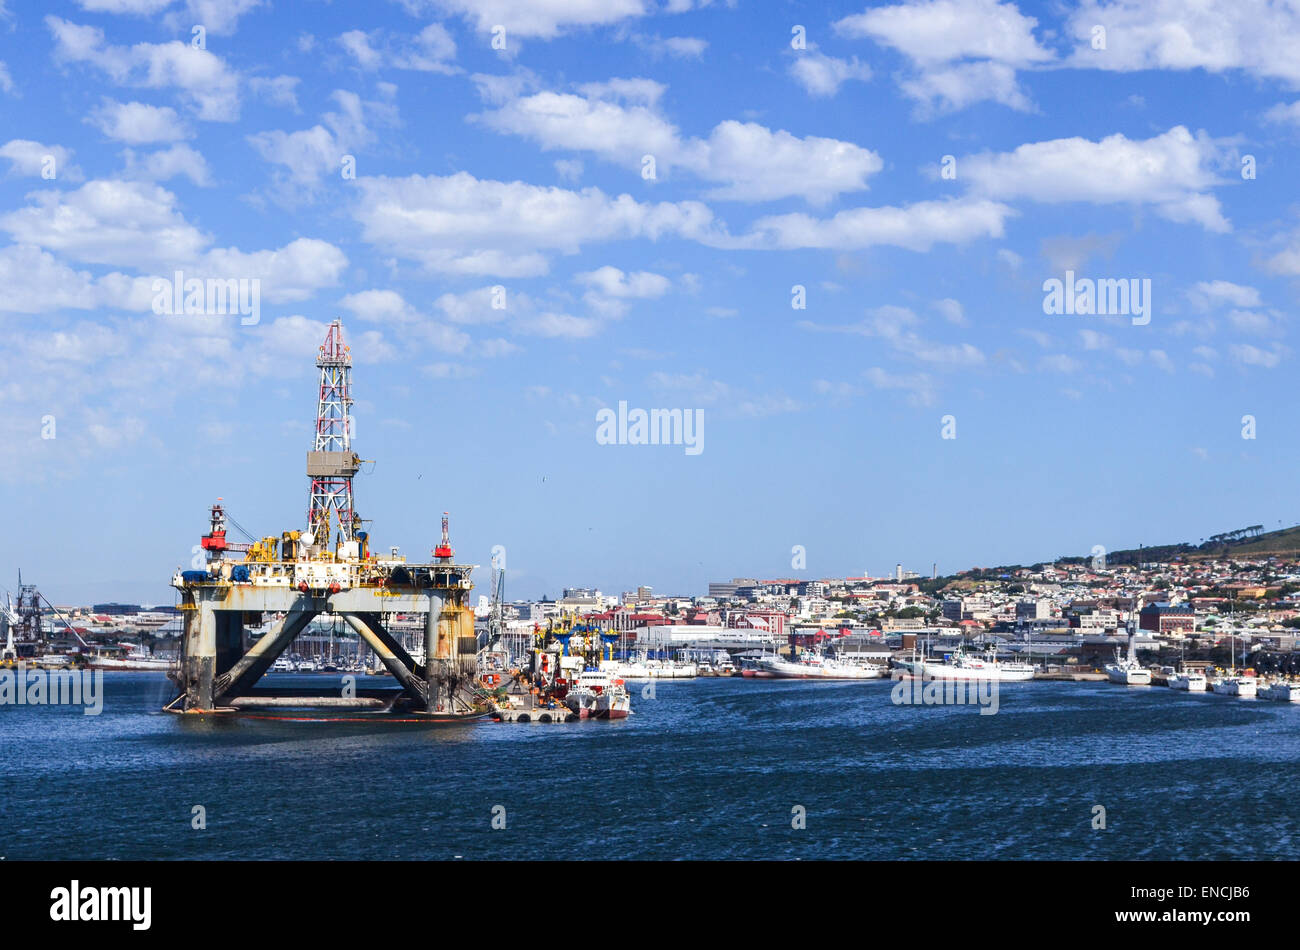 An offshore oil platform being serviced in the port of Cape Town, South Africa Stock Photo